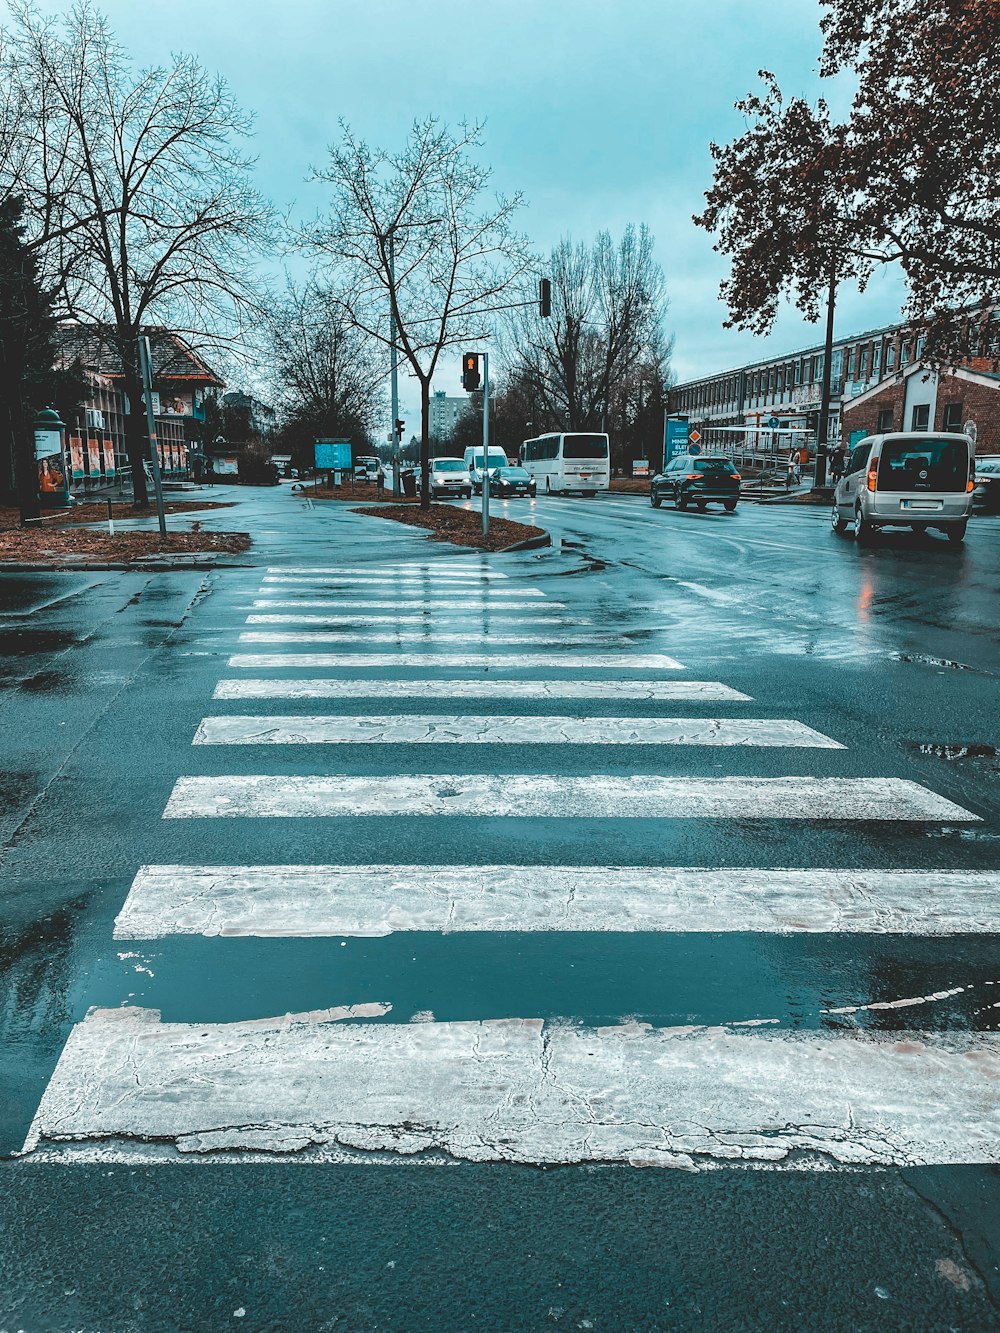 a crosswalk in the middle of a city street